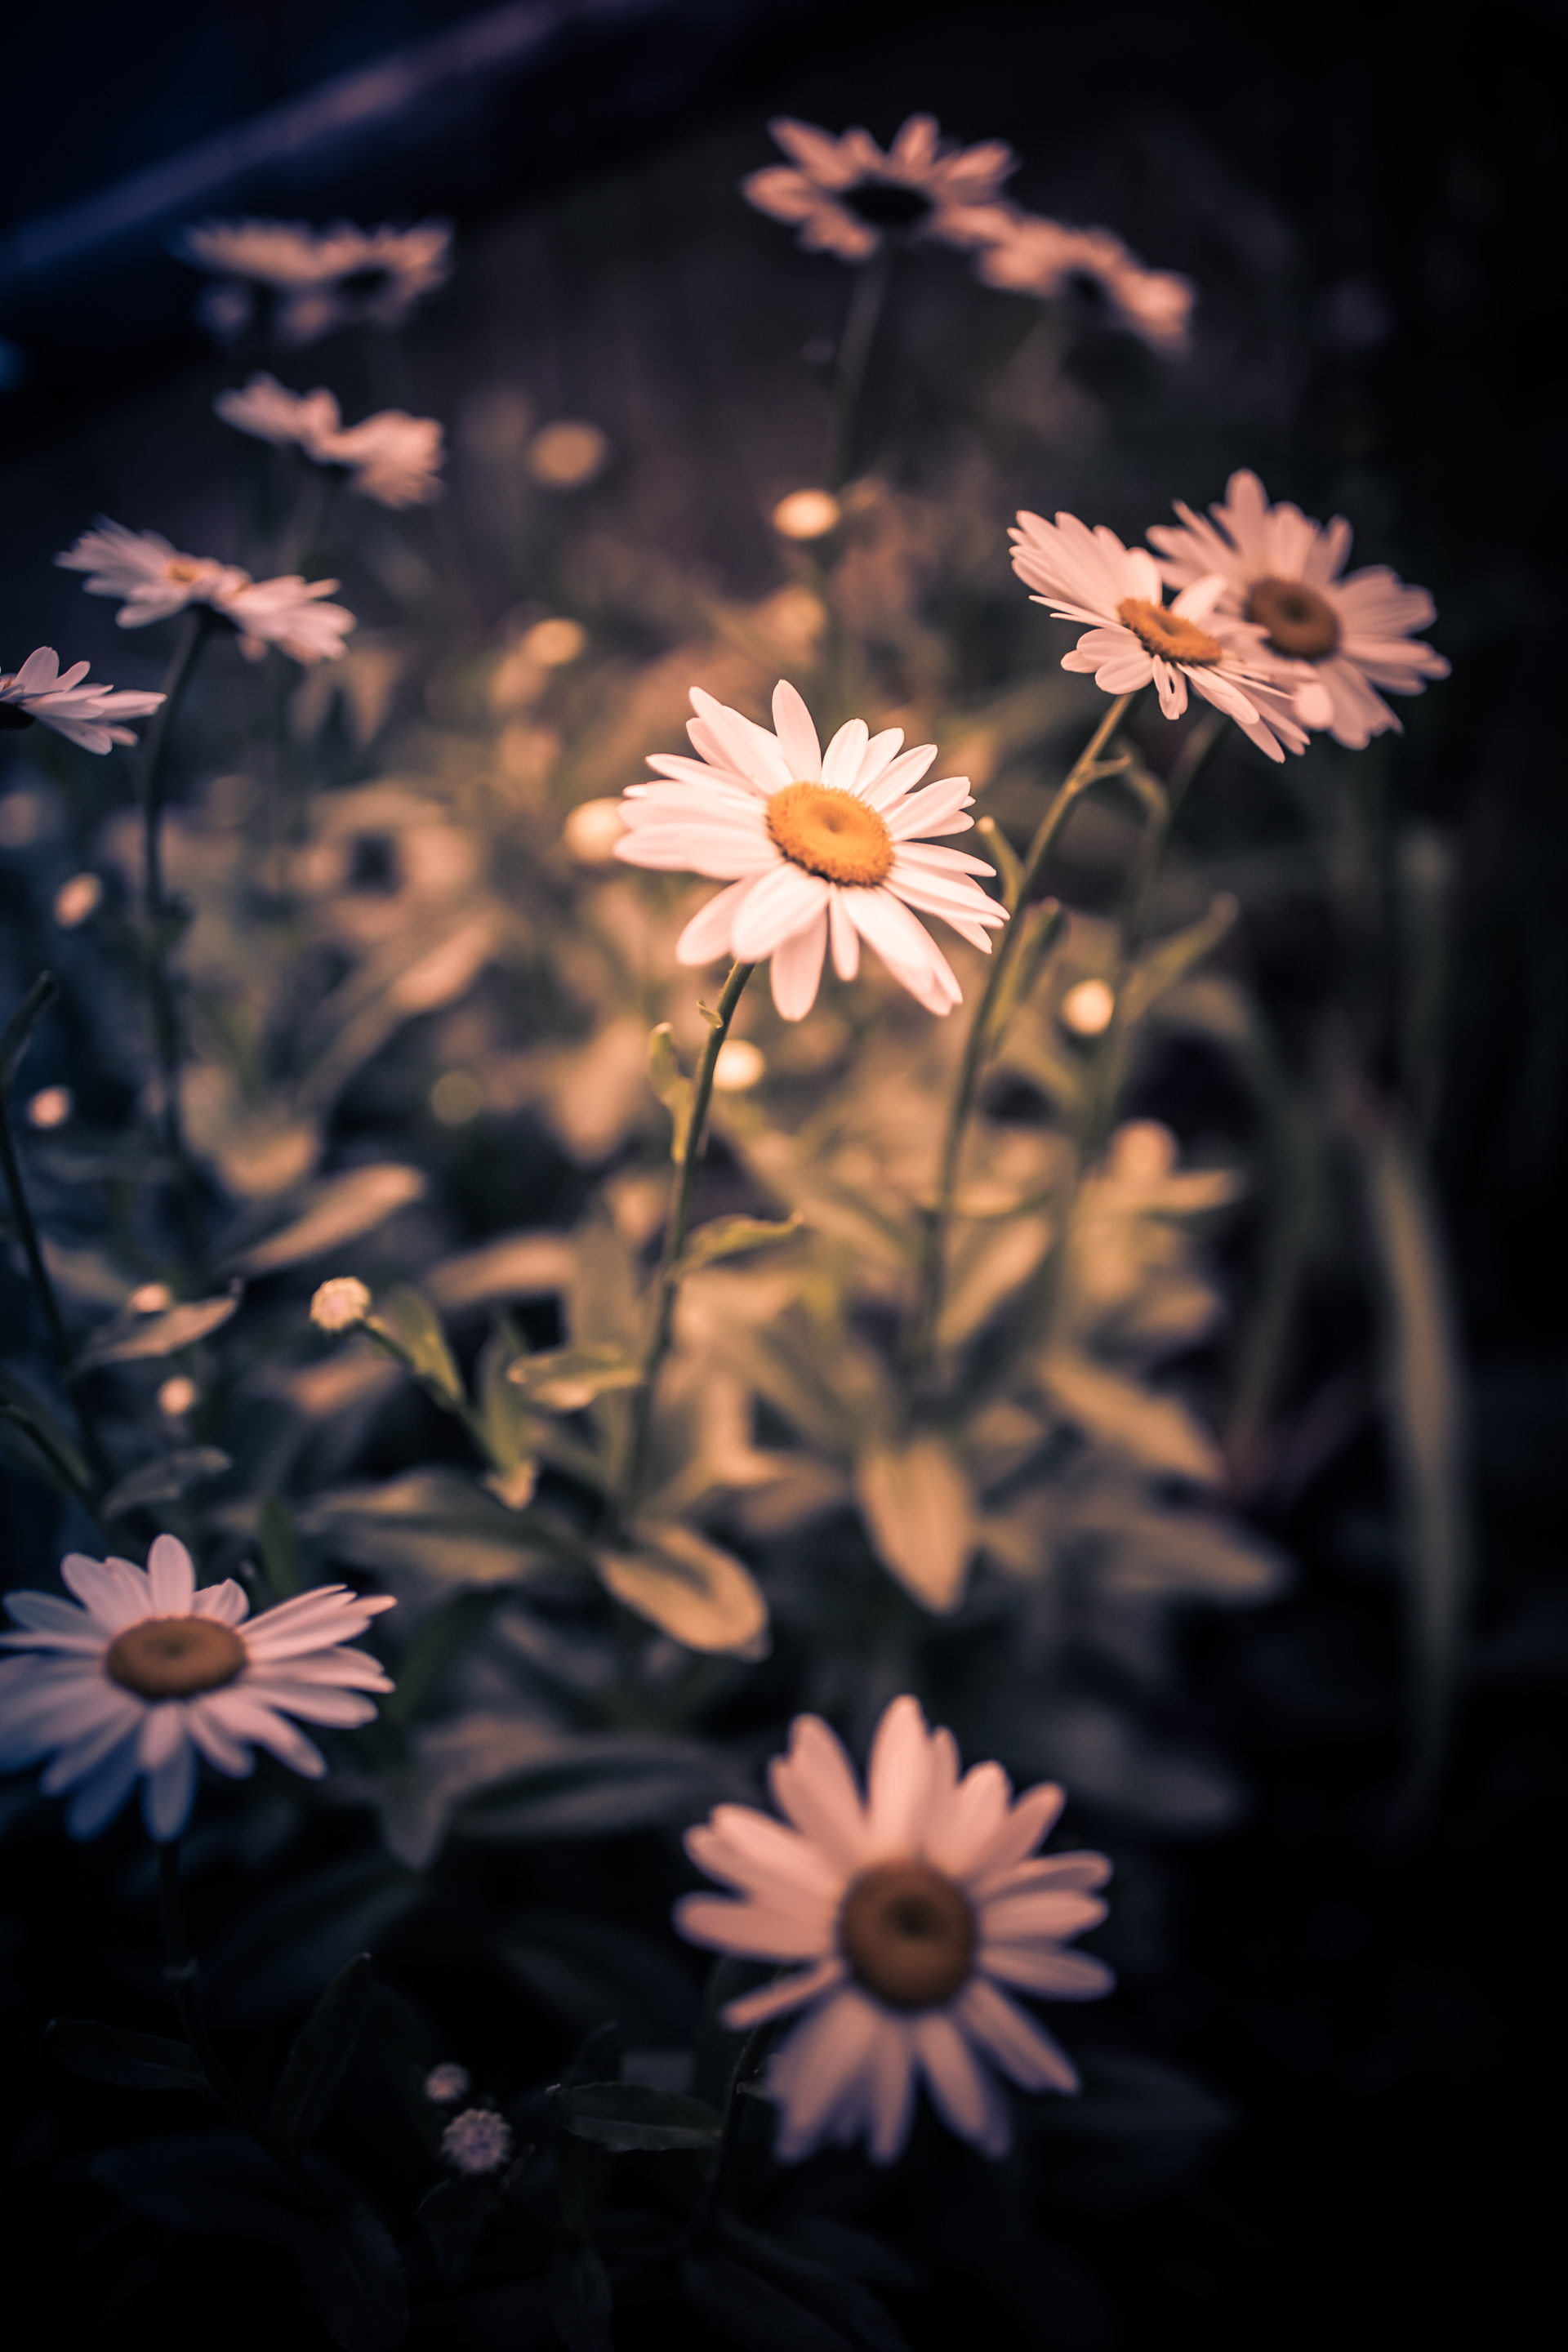 White daisy blossoms photographed at 35mm in low key vertical orientation.